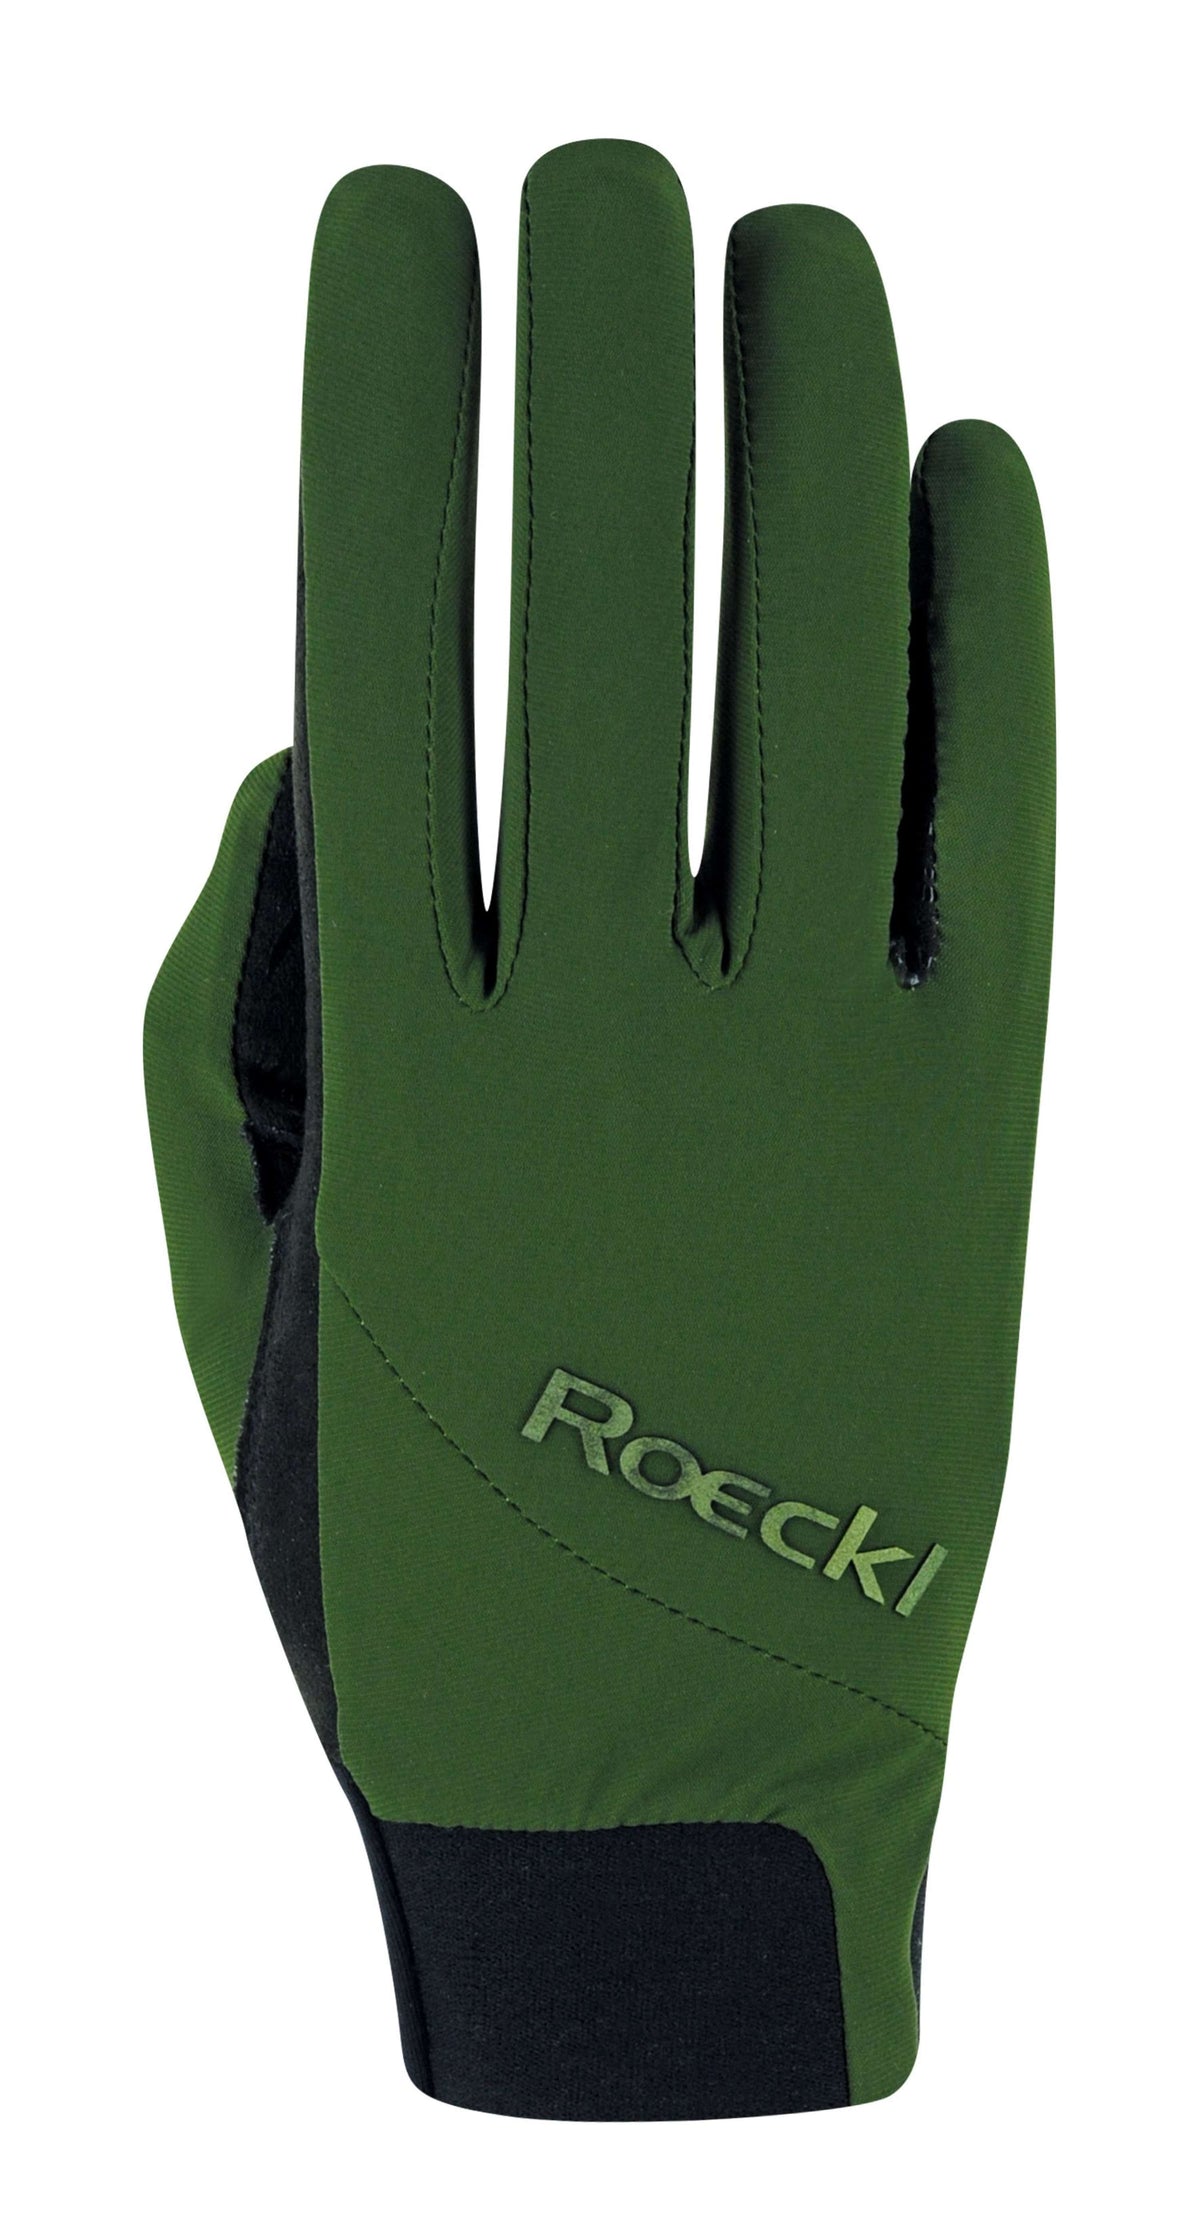 Roeckl Reithandschuhe Maniva Chive Green